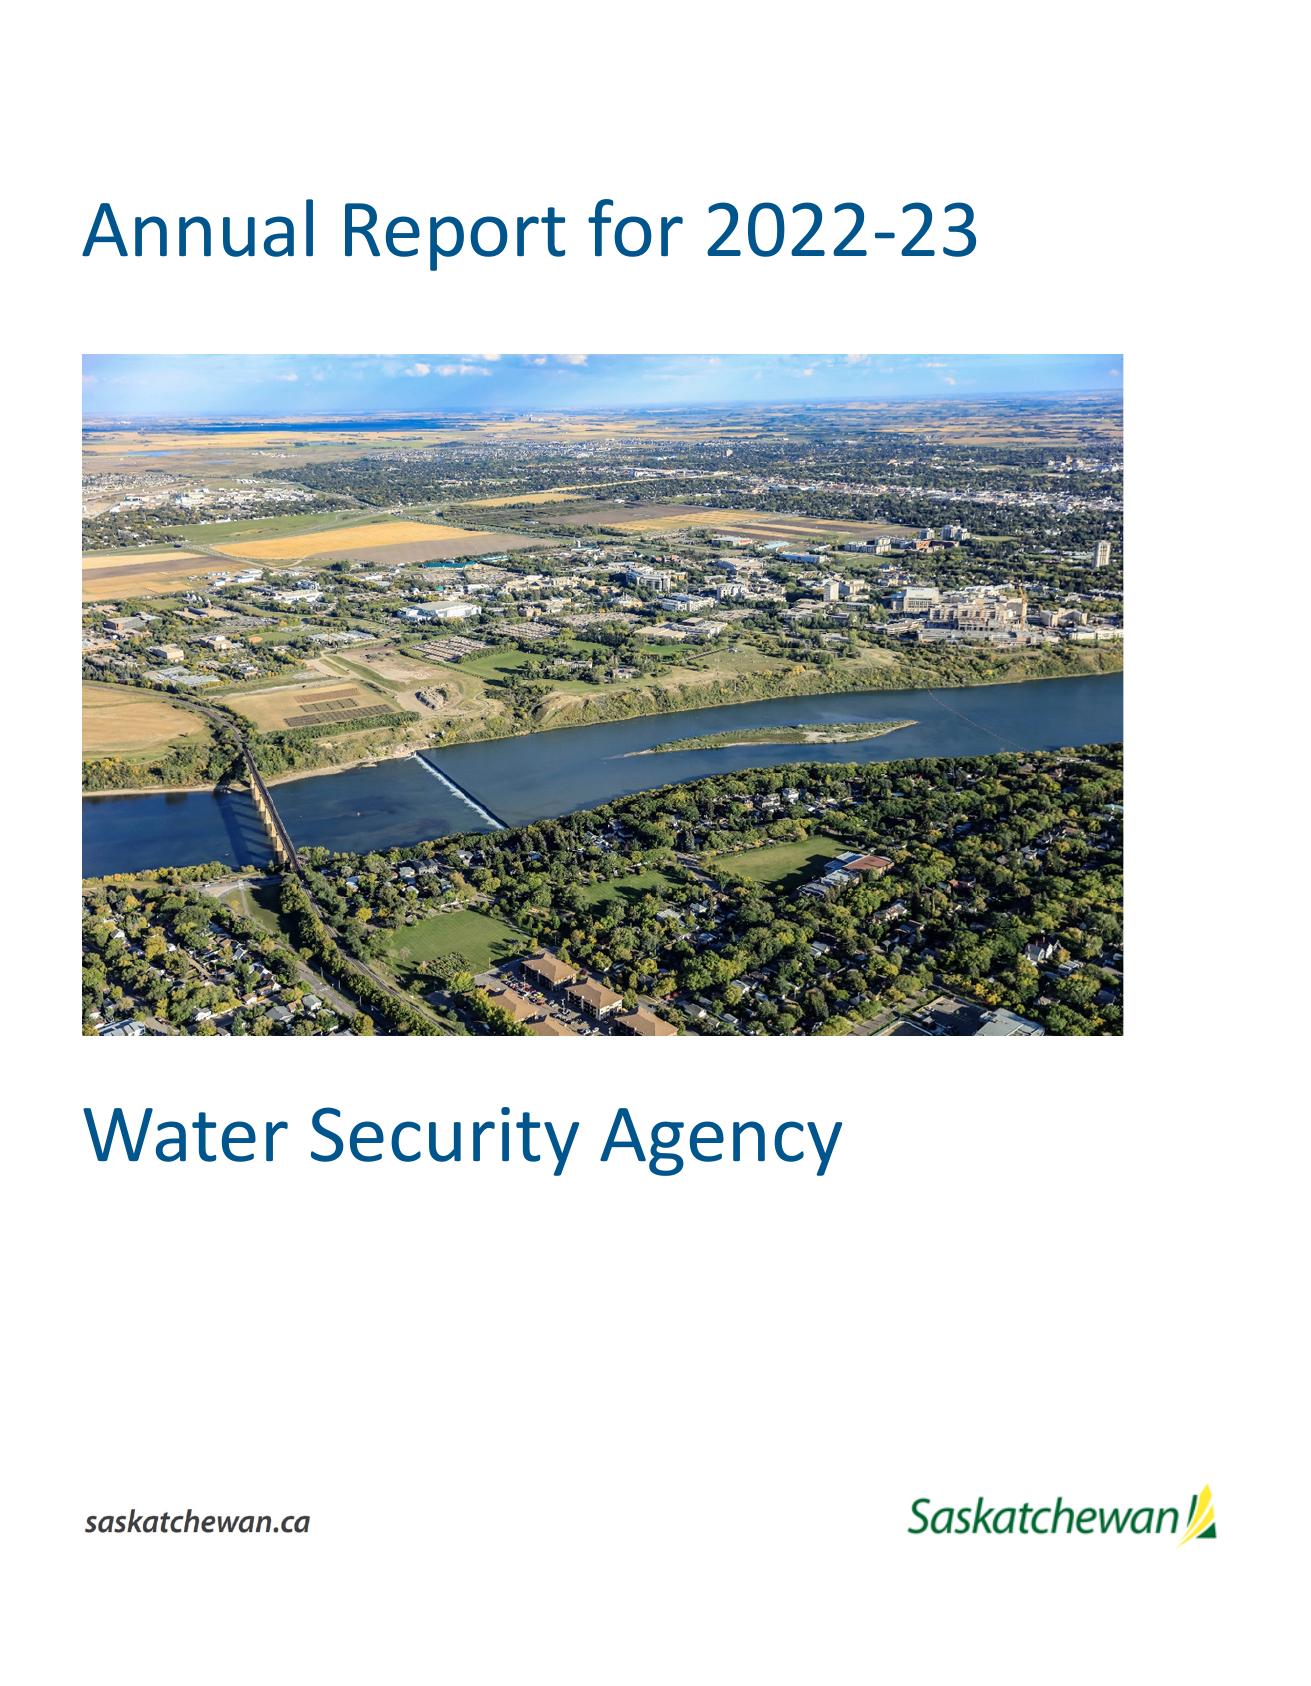 WSASK 2023 Annual Report